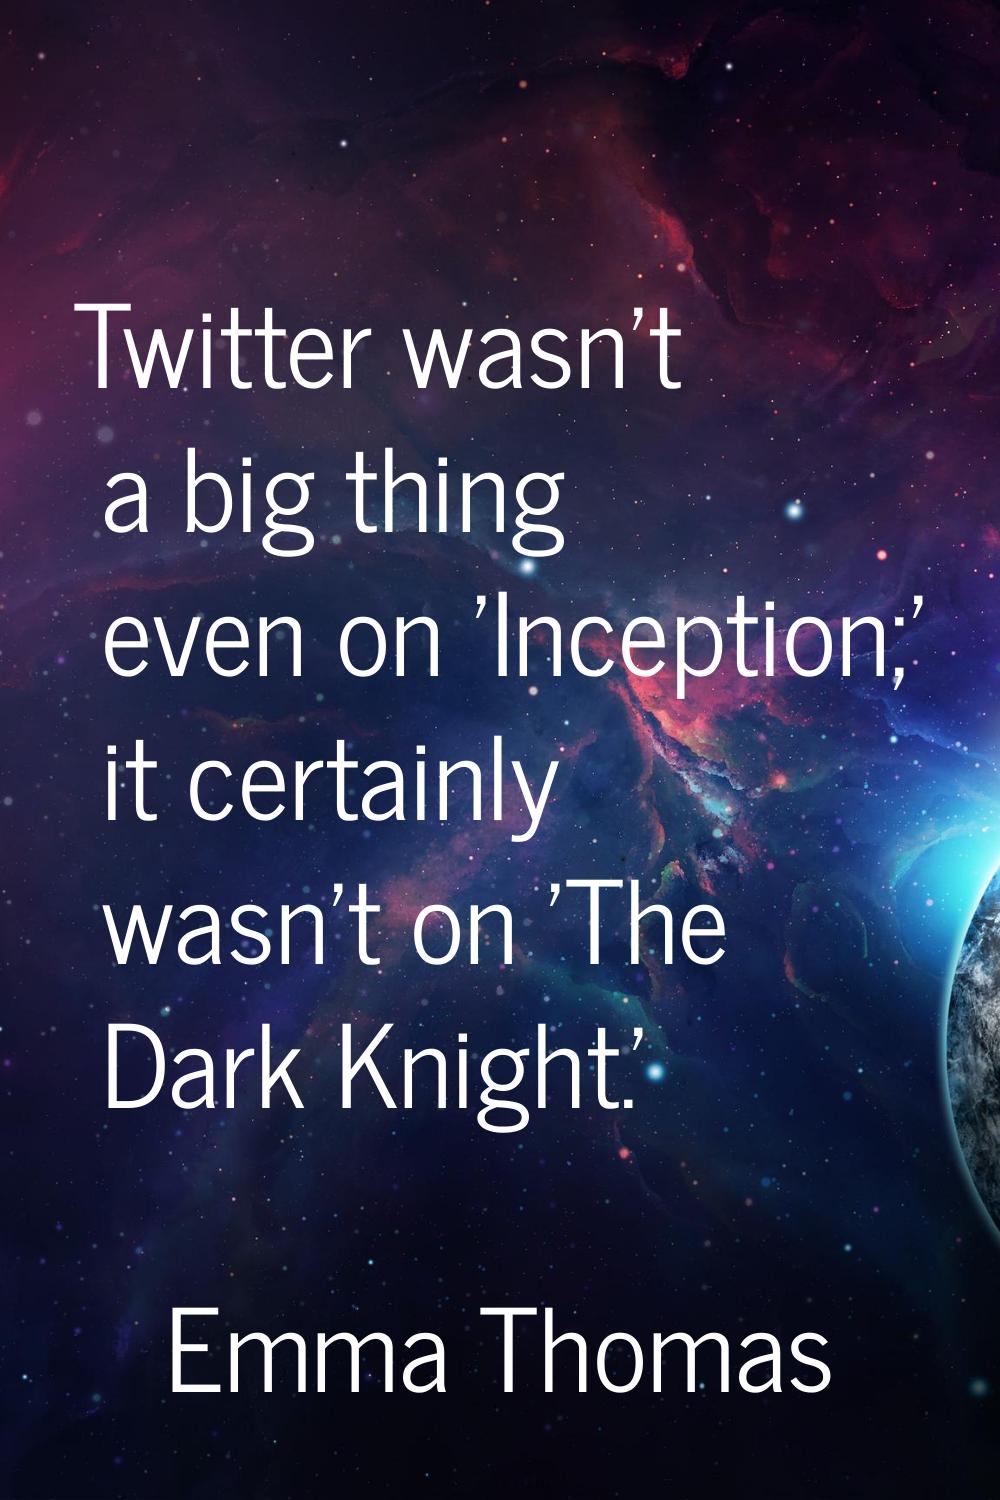 Twitter wasn't a big thing even on 'Inception;' it certainly wasn't on 'The Dark Knight.'